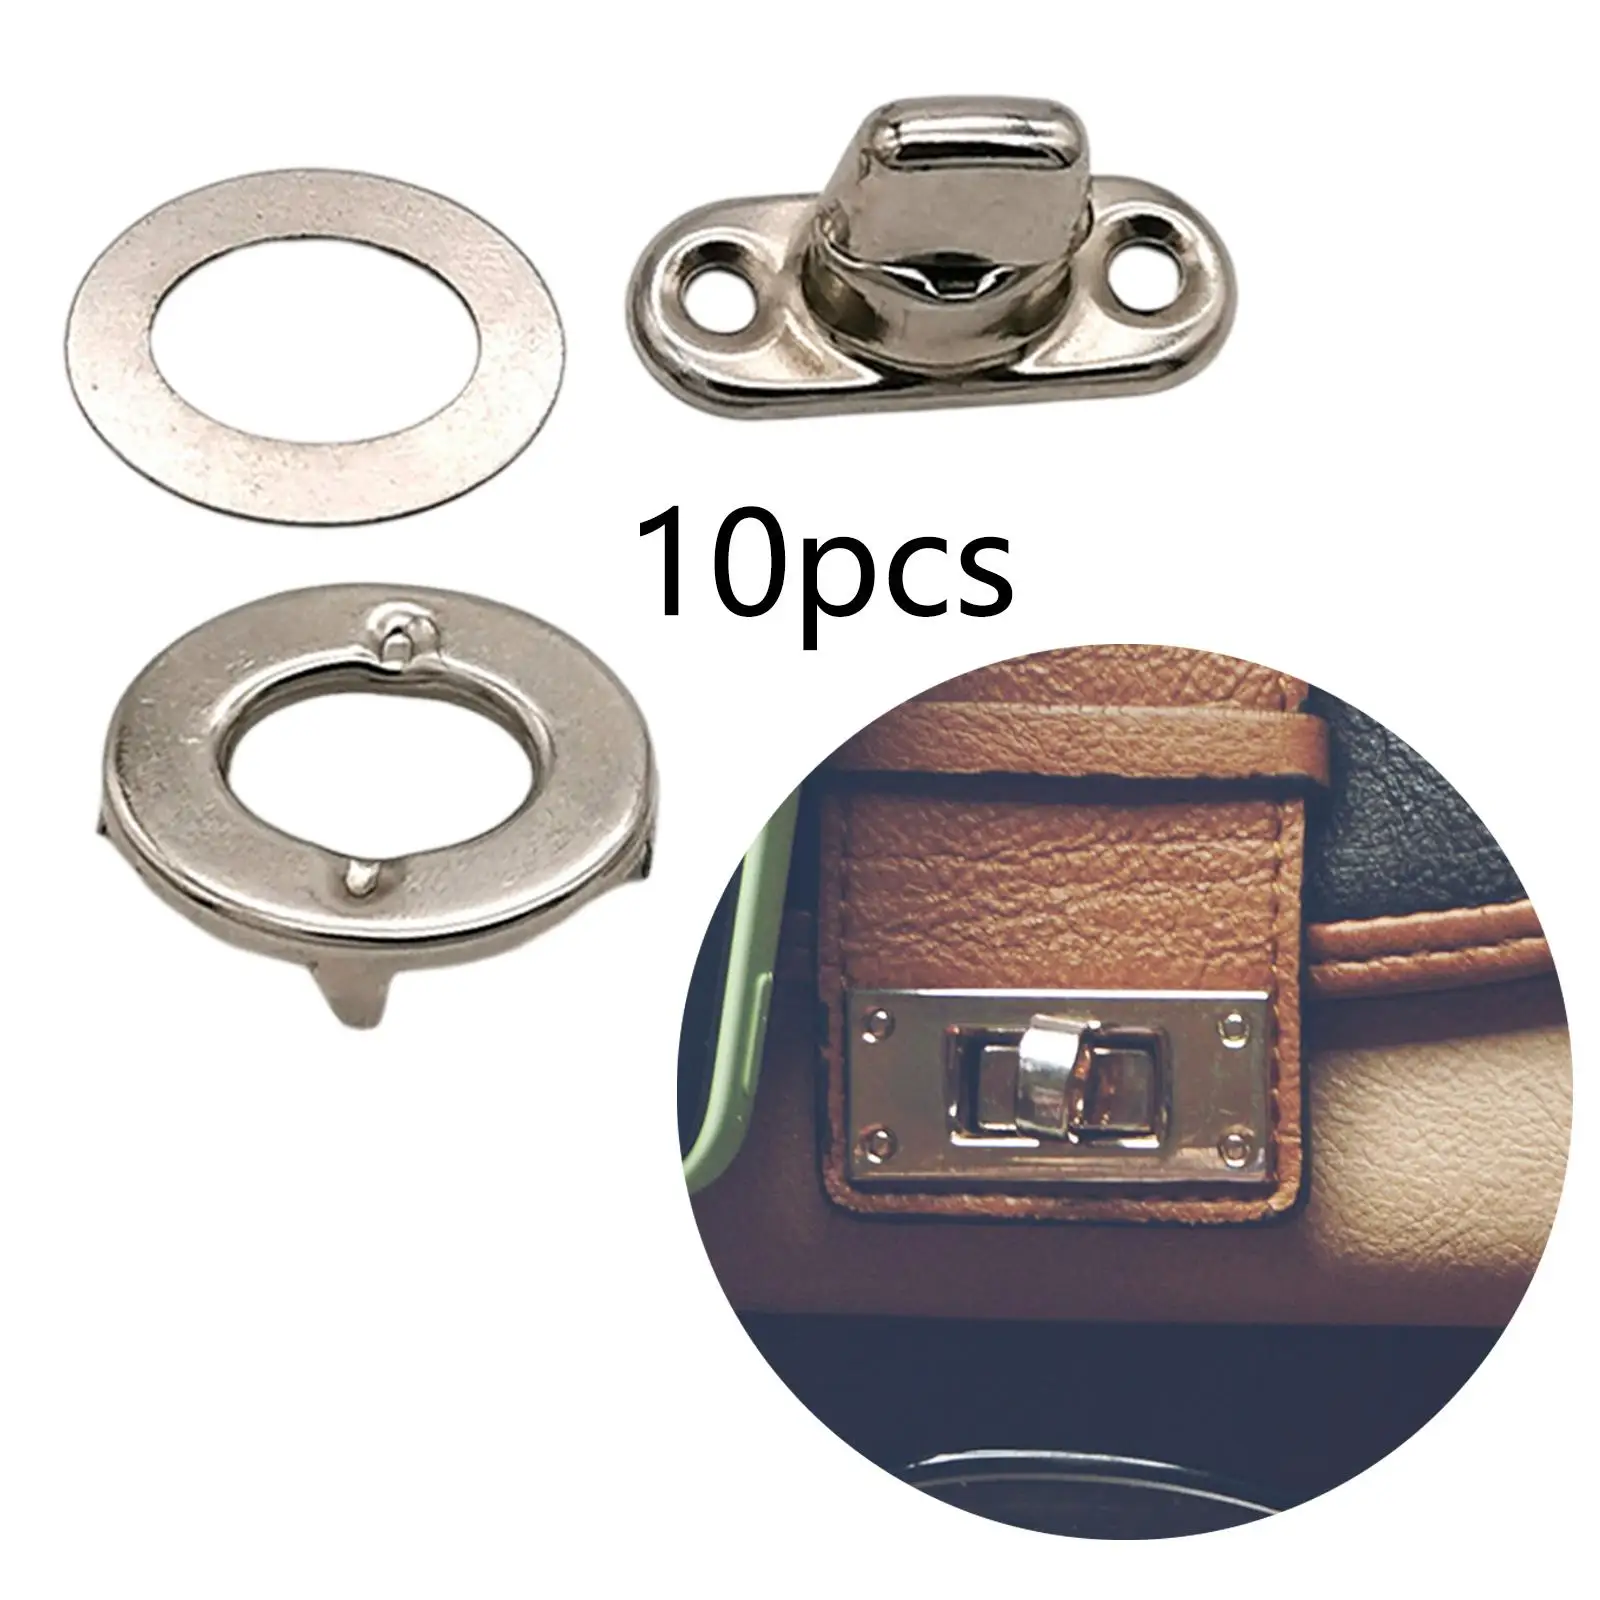 10Pcs Alloy Rotary Button Bag Twist Lock Decoration Buckles Durtable Box Catch latches for Craft Boxes Luggage Drawer Furniture